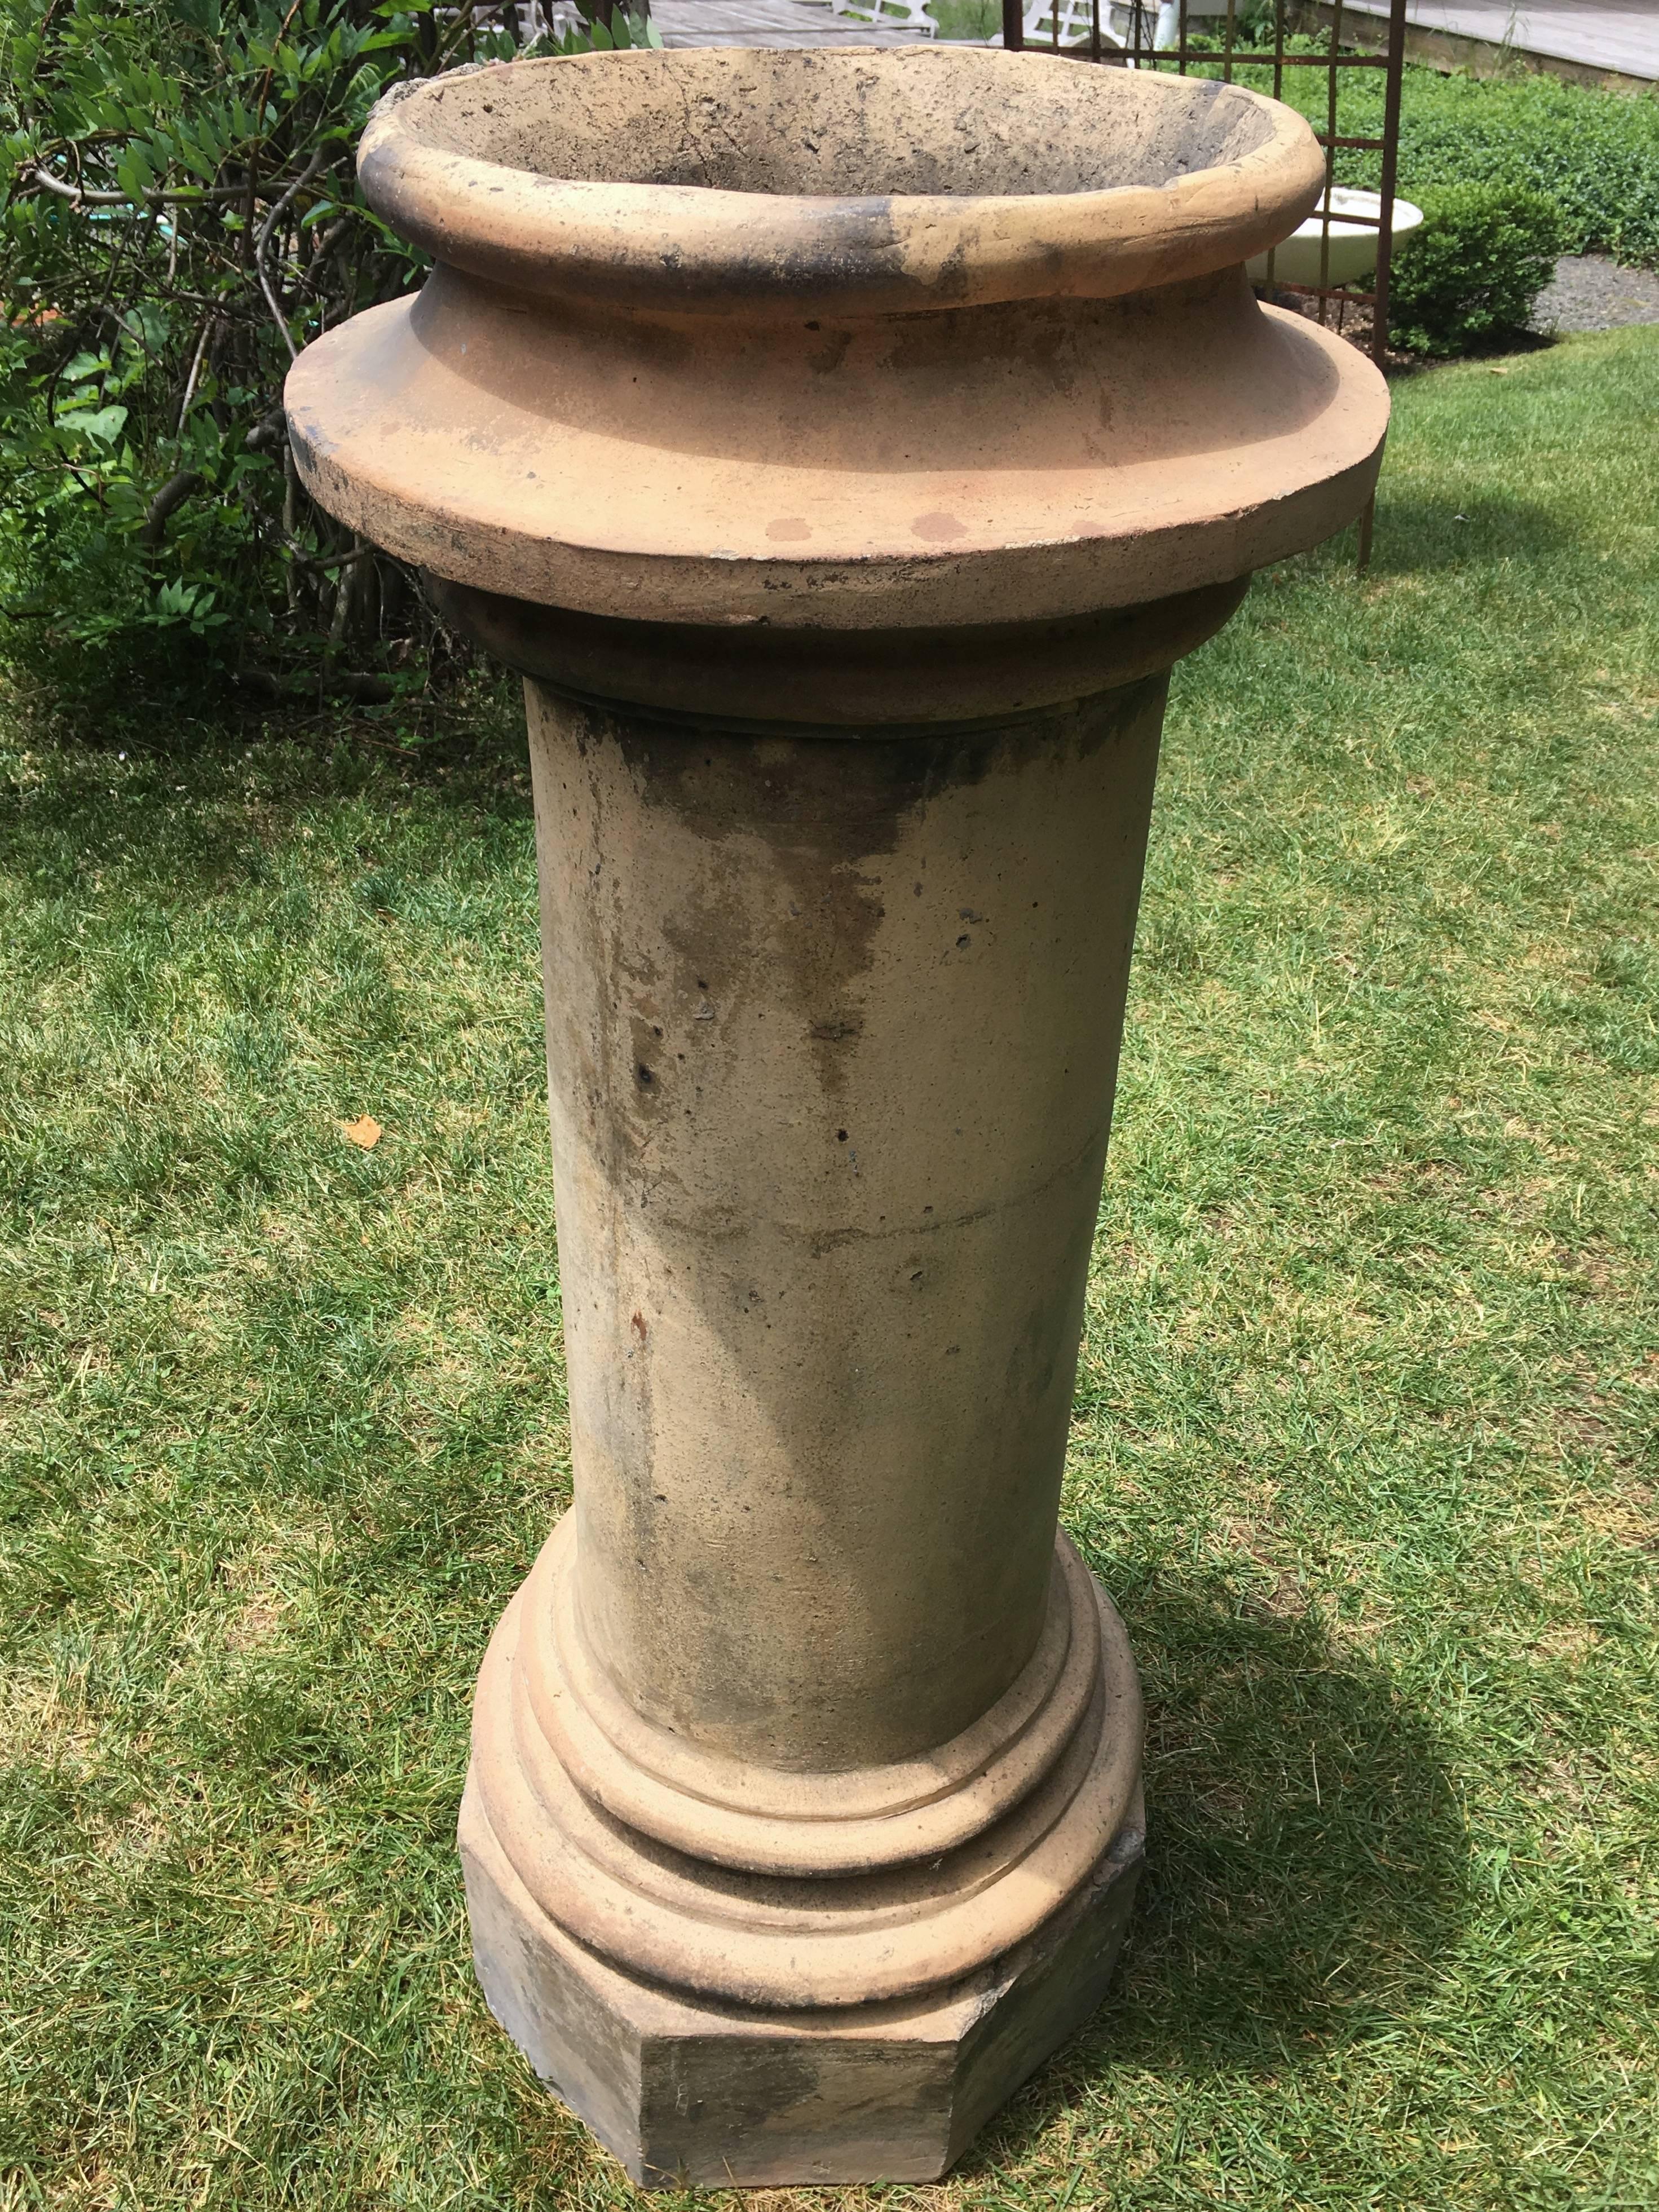 Rare because of its size, this hand-thrown terracotta chimney pot was removed from an enormous building in the Southeast of England near Kent. It would make a wonderful focal point in the center of a garden, and is just the right size to hold a